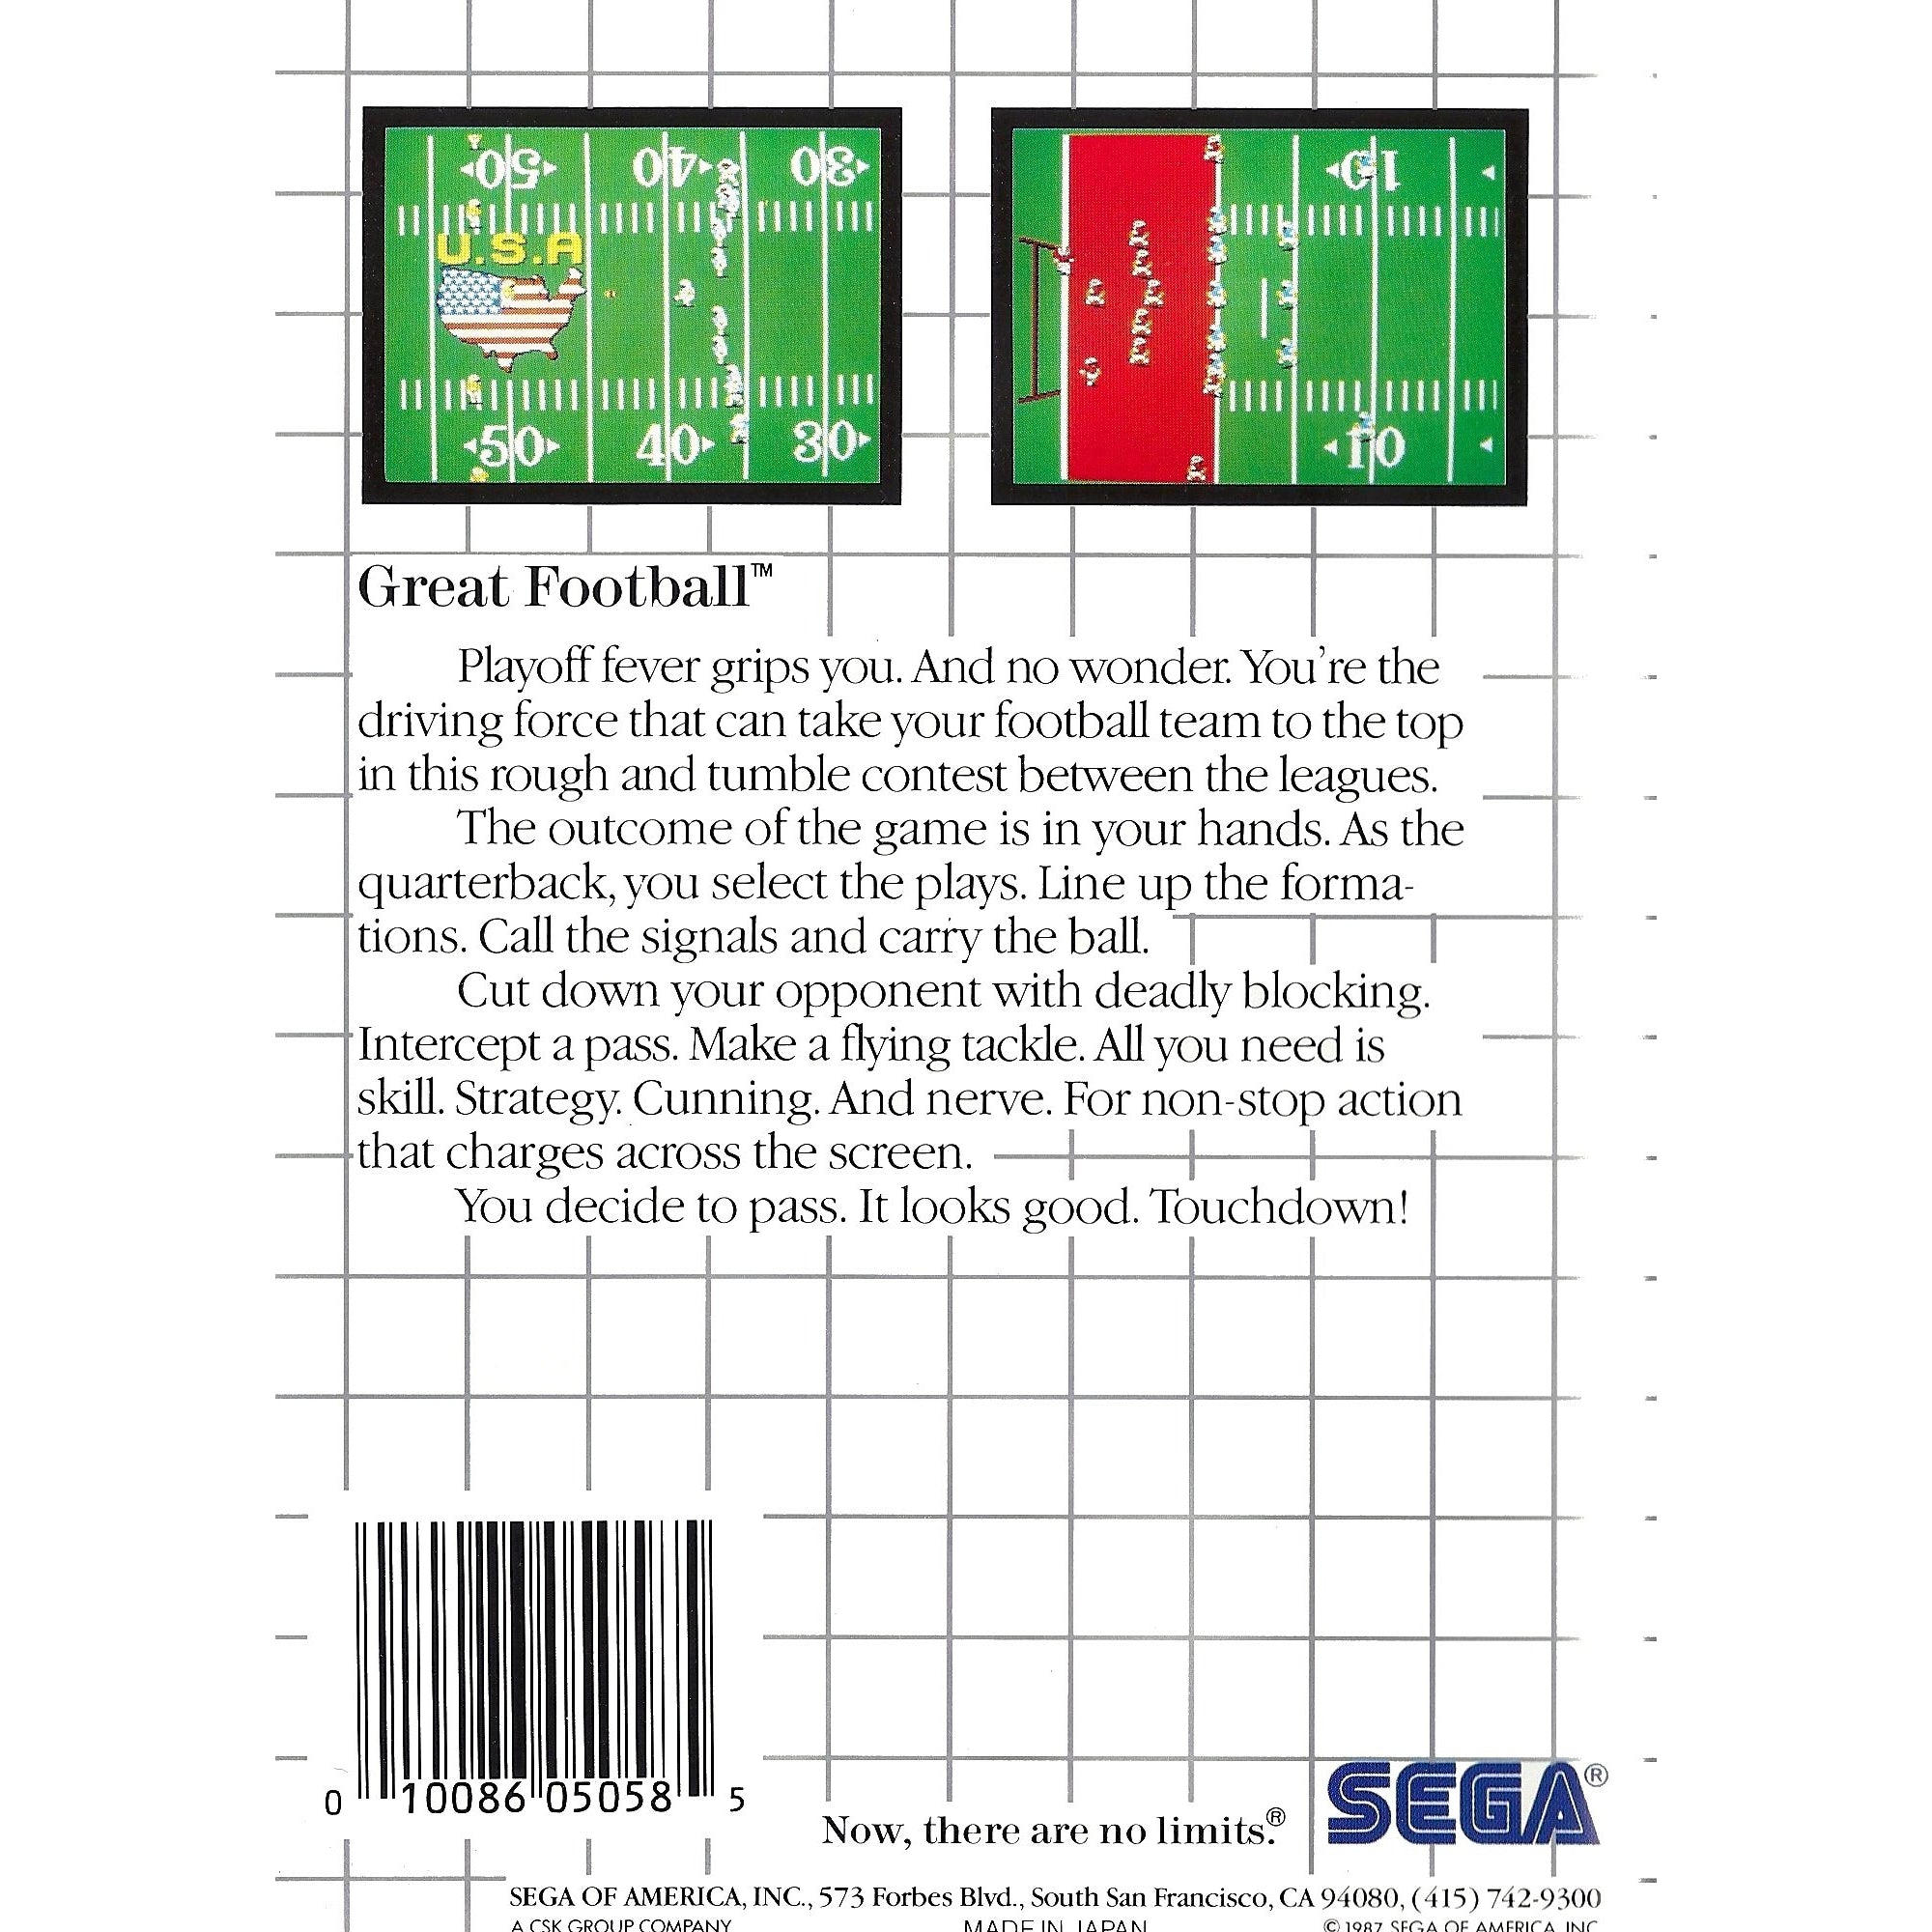 Great Football - Sega Master System Game Complete - YourGamingShop.com - Buy, Sell, Trade Video Games Online. 120 Day Warranty. Satisfaction Guaranteed.